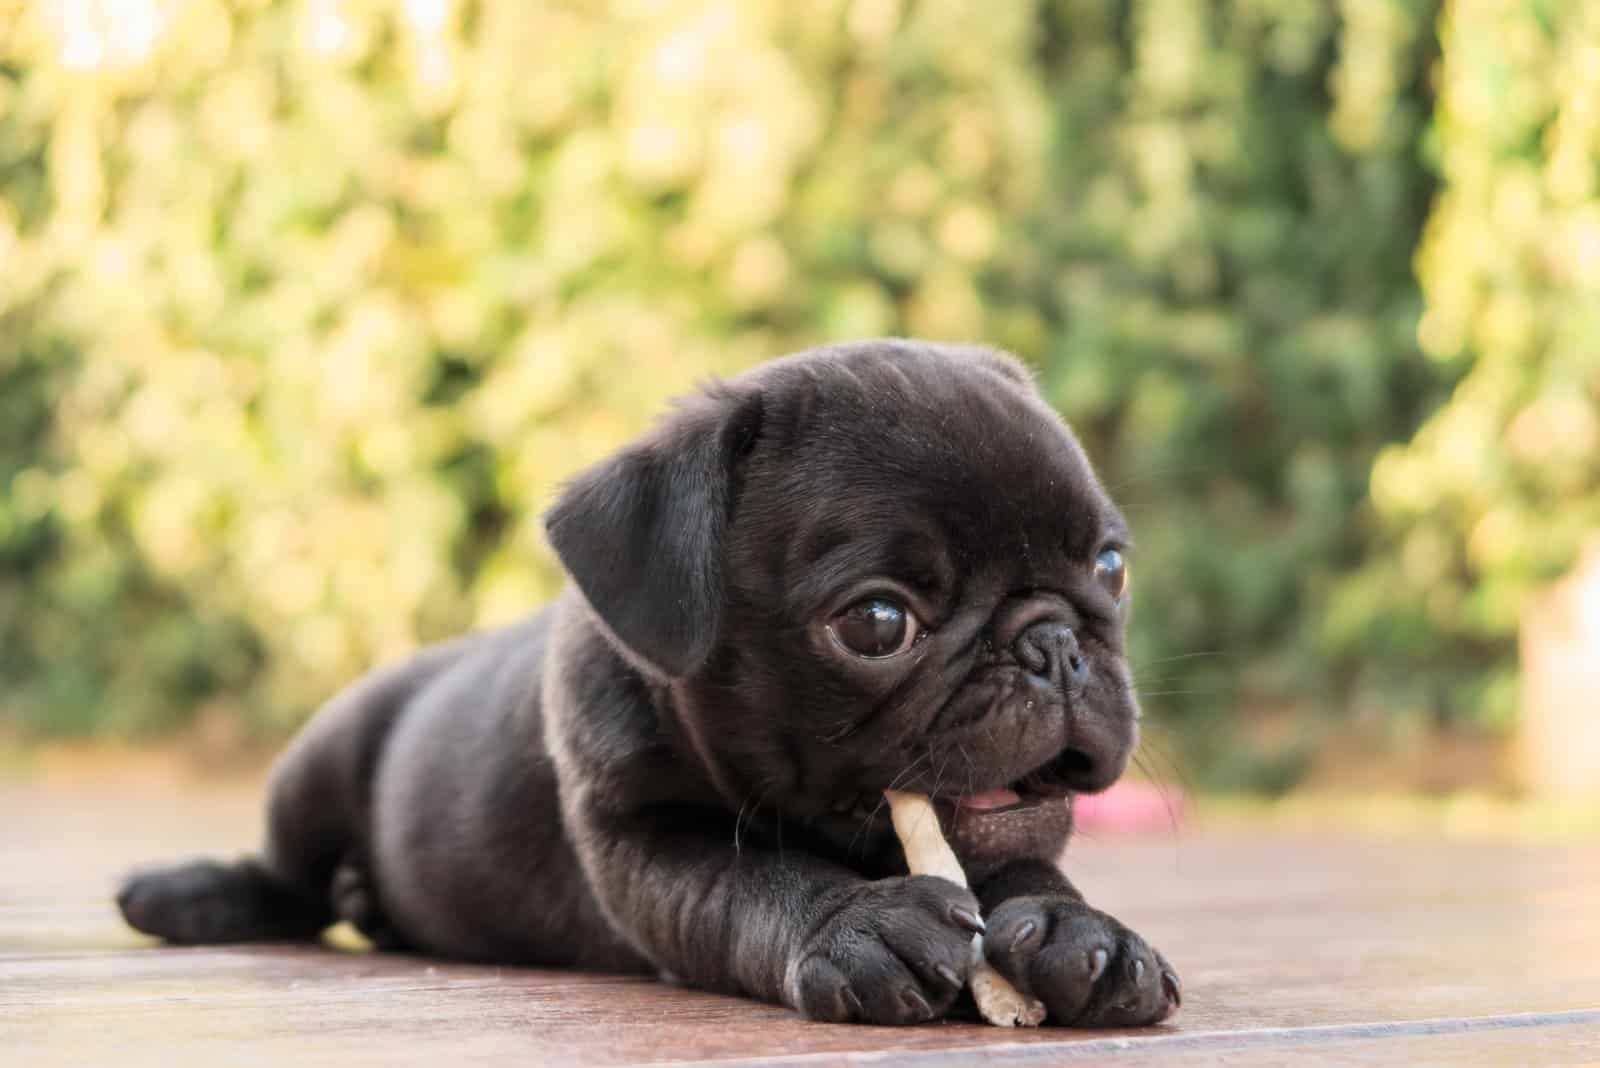 The black puppy pug dog lying to eat dog snack on wooden floor